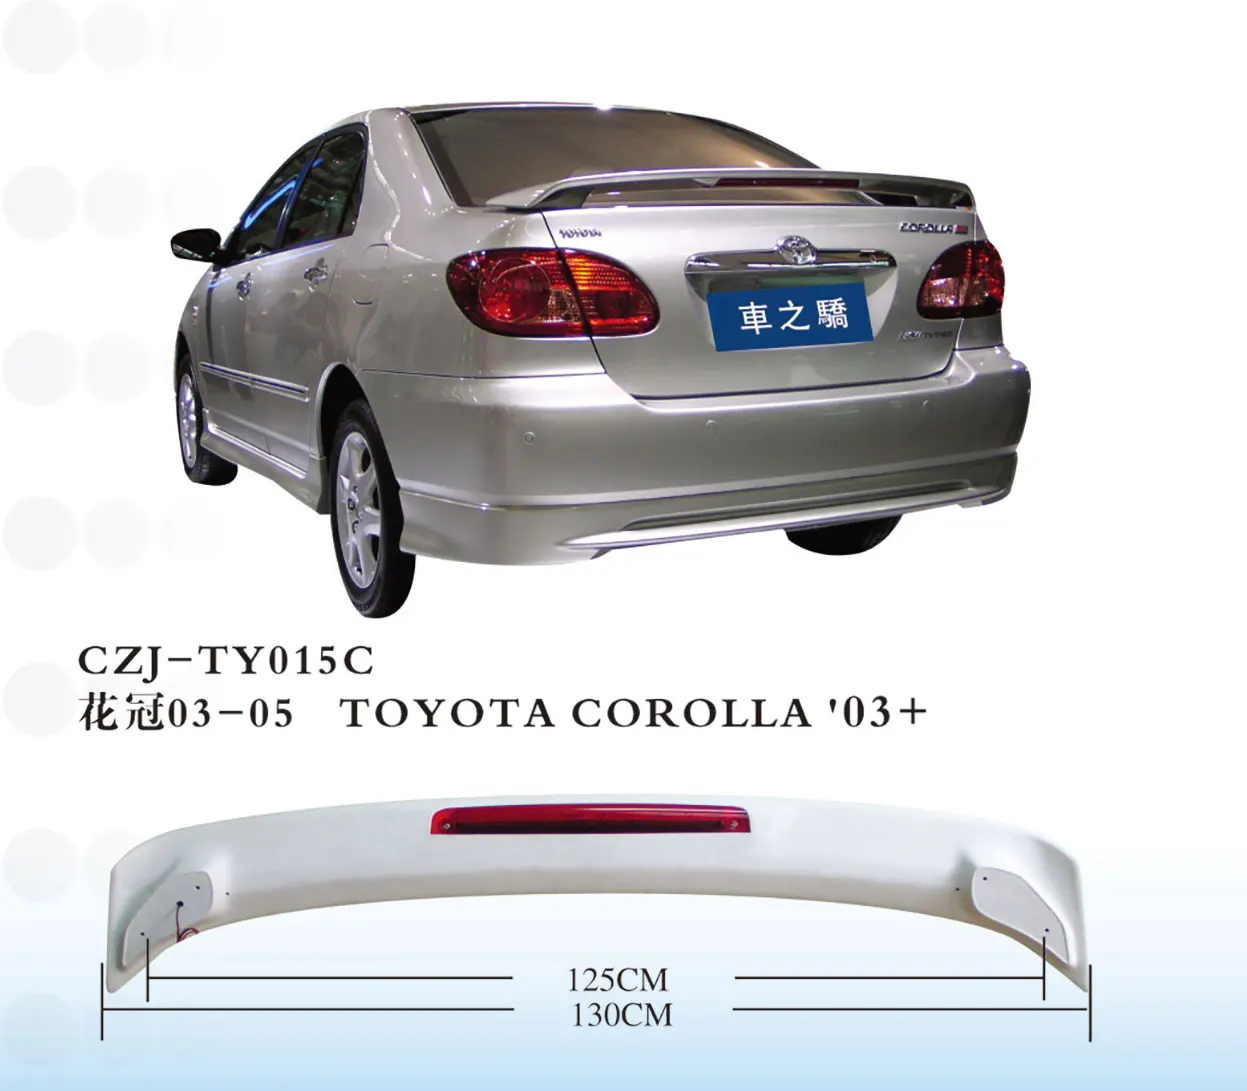 Toyota Corolla 2003 Pricing  Specifications  carsalescomau